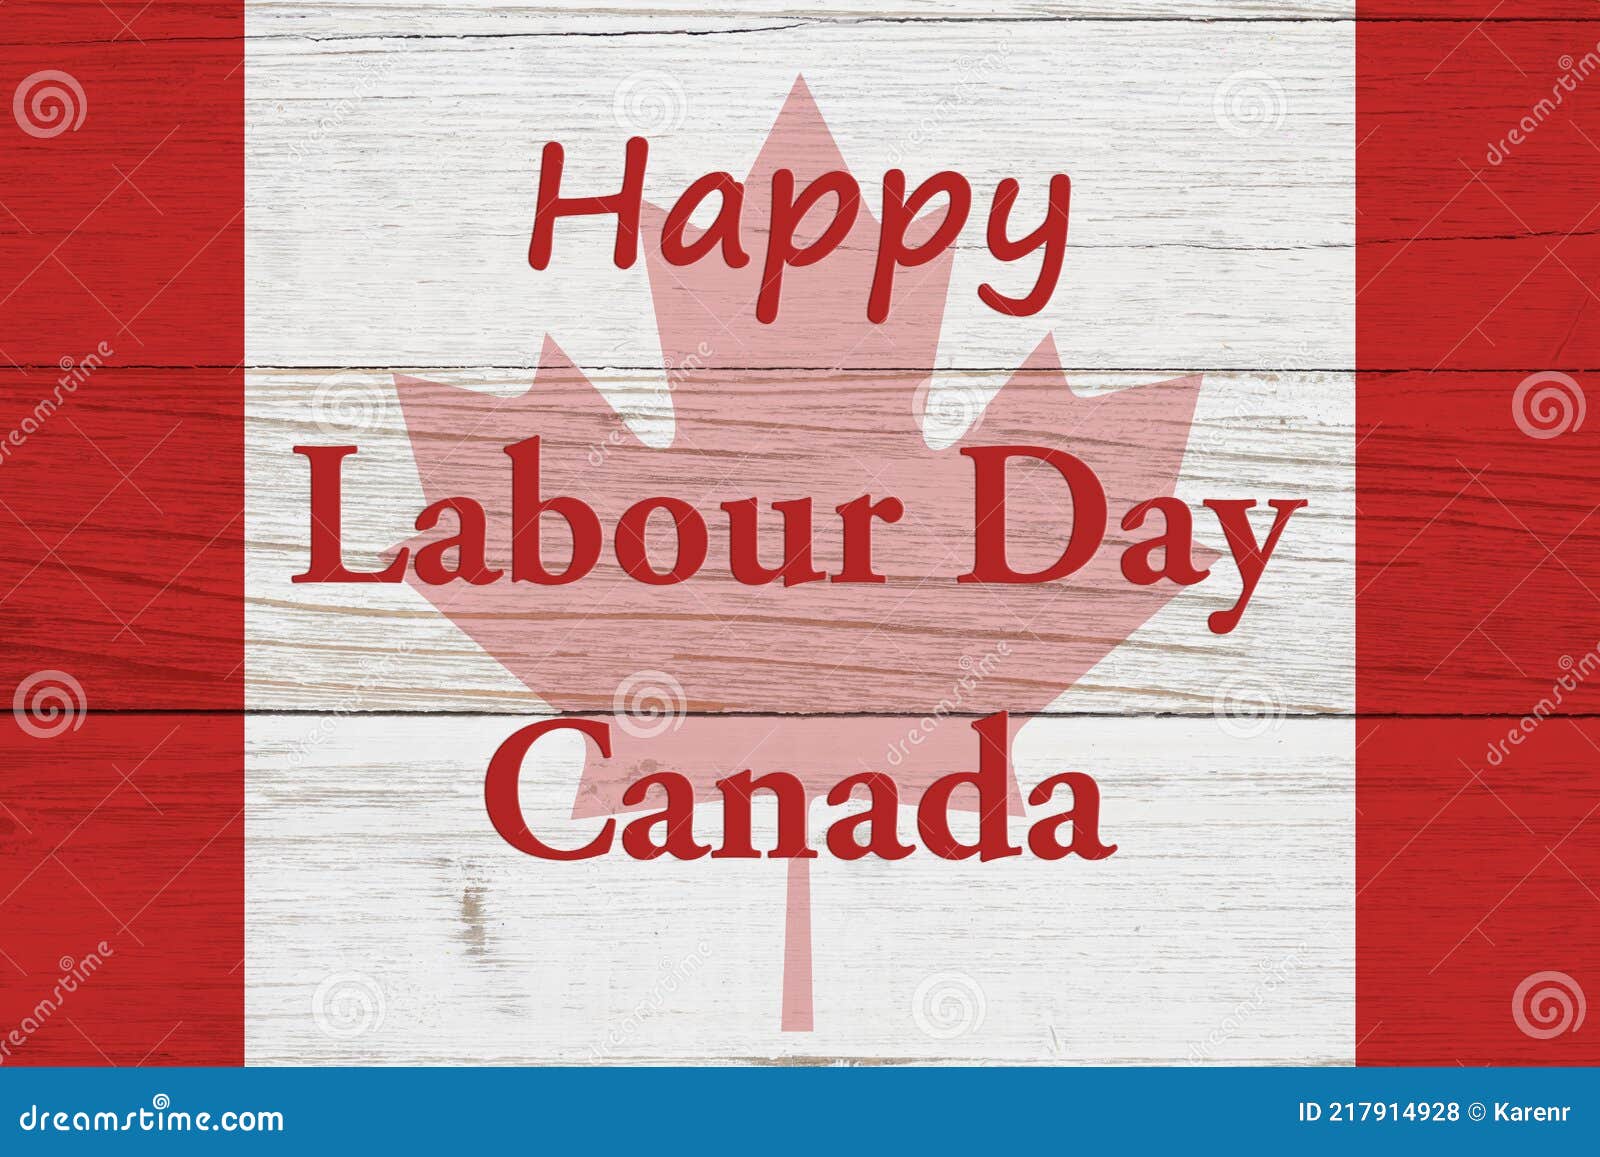 Happy Labour Day Canada Message with Canadian Maple Leaf Flag on Wood